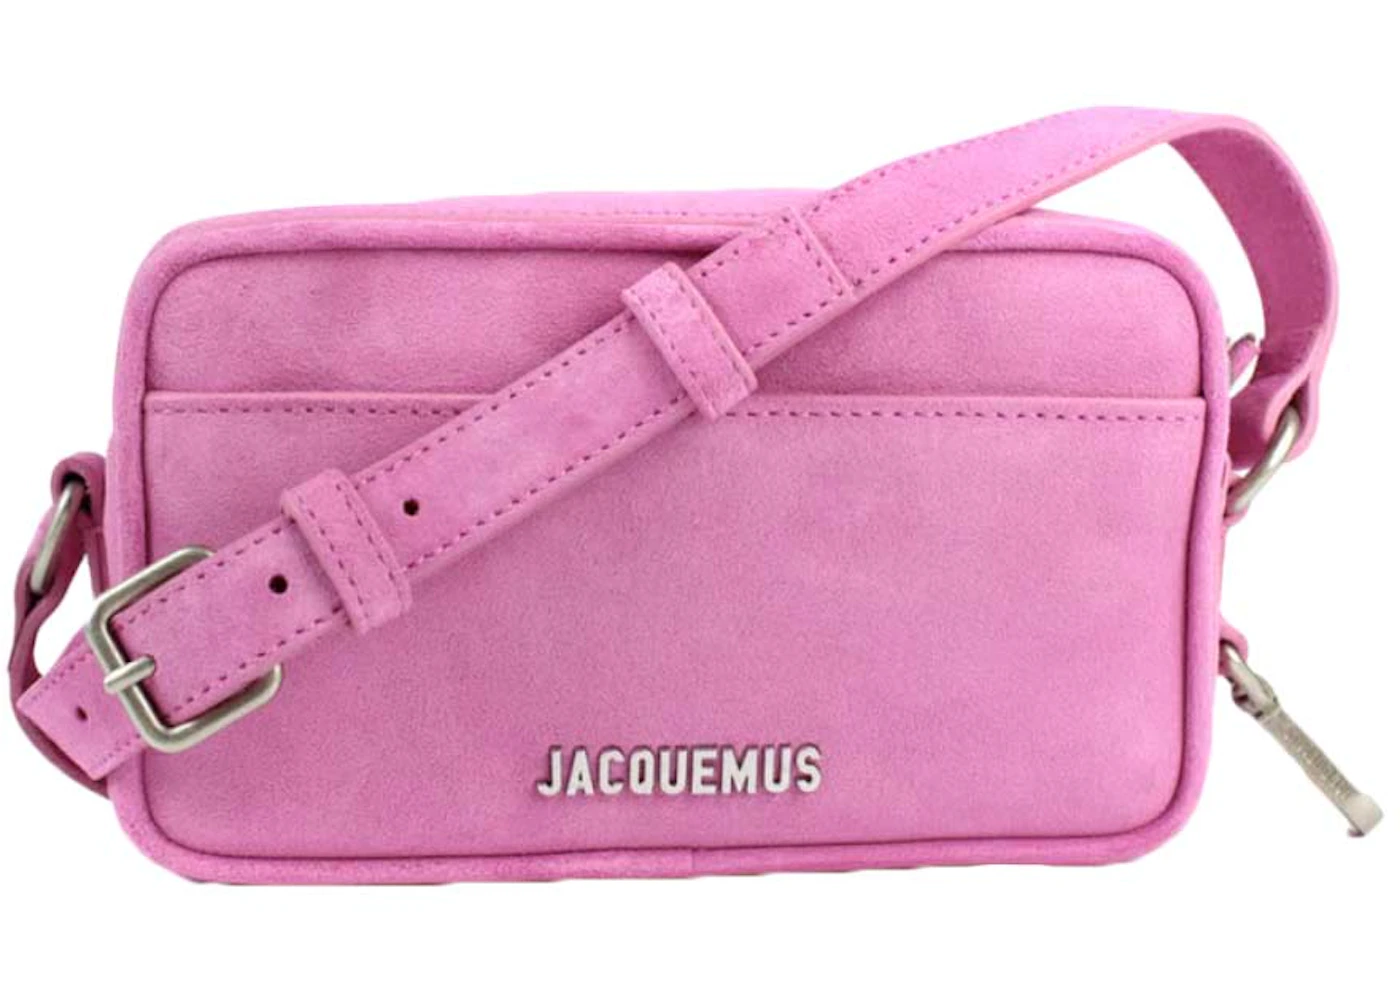 Jacquemus Le Baneto Strap Pochette Bag Pink in Suede Calfskin Leather ...